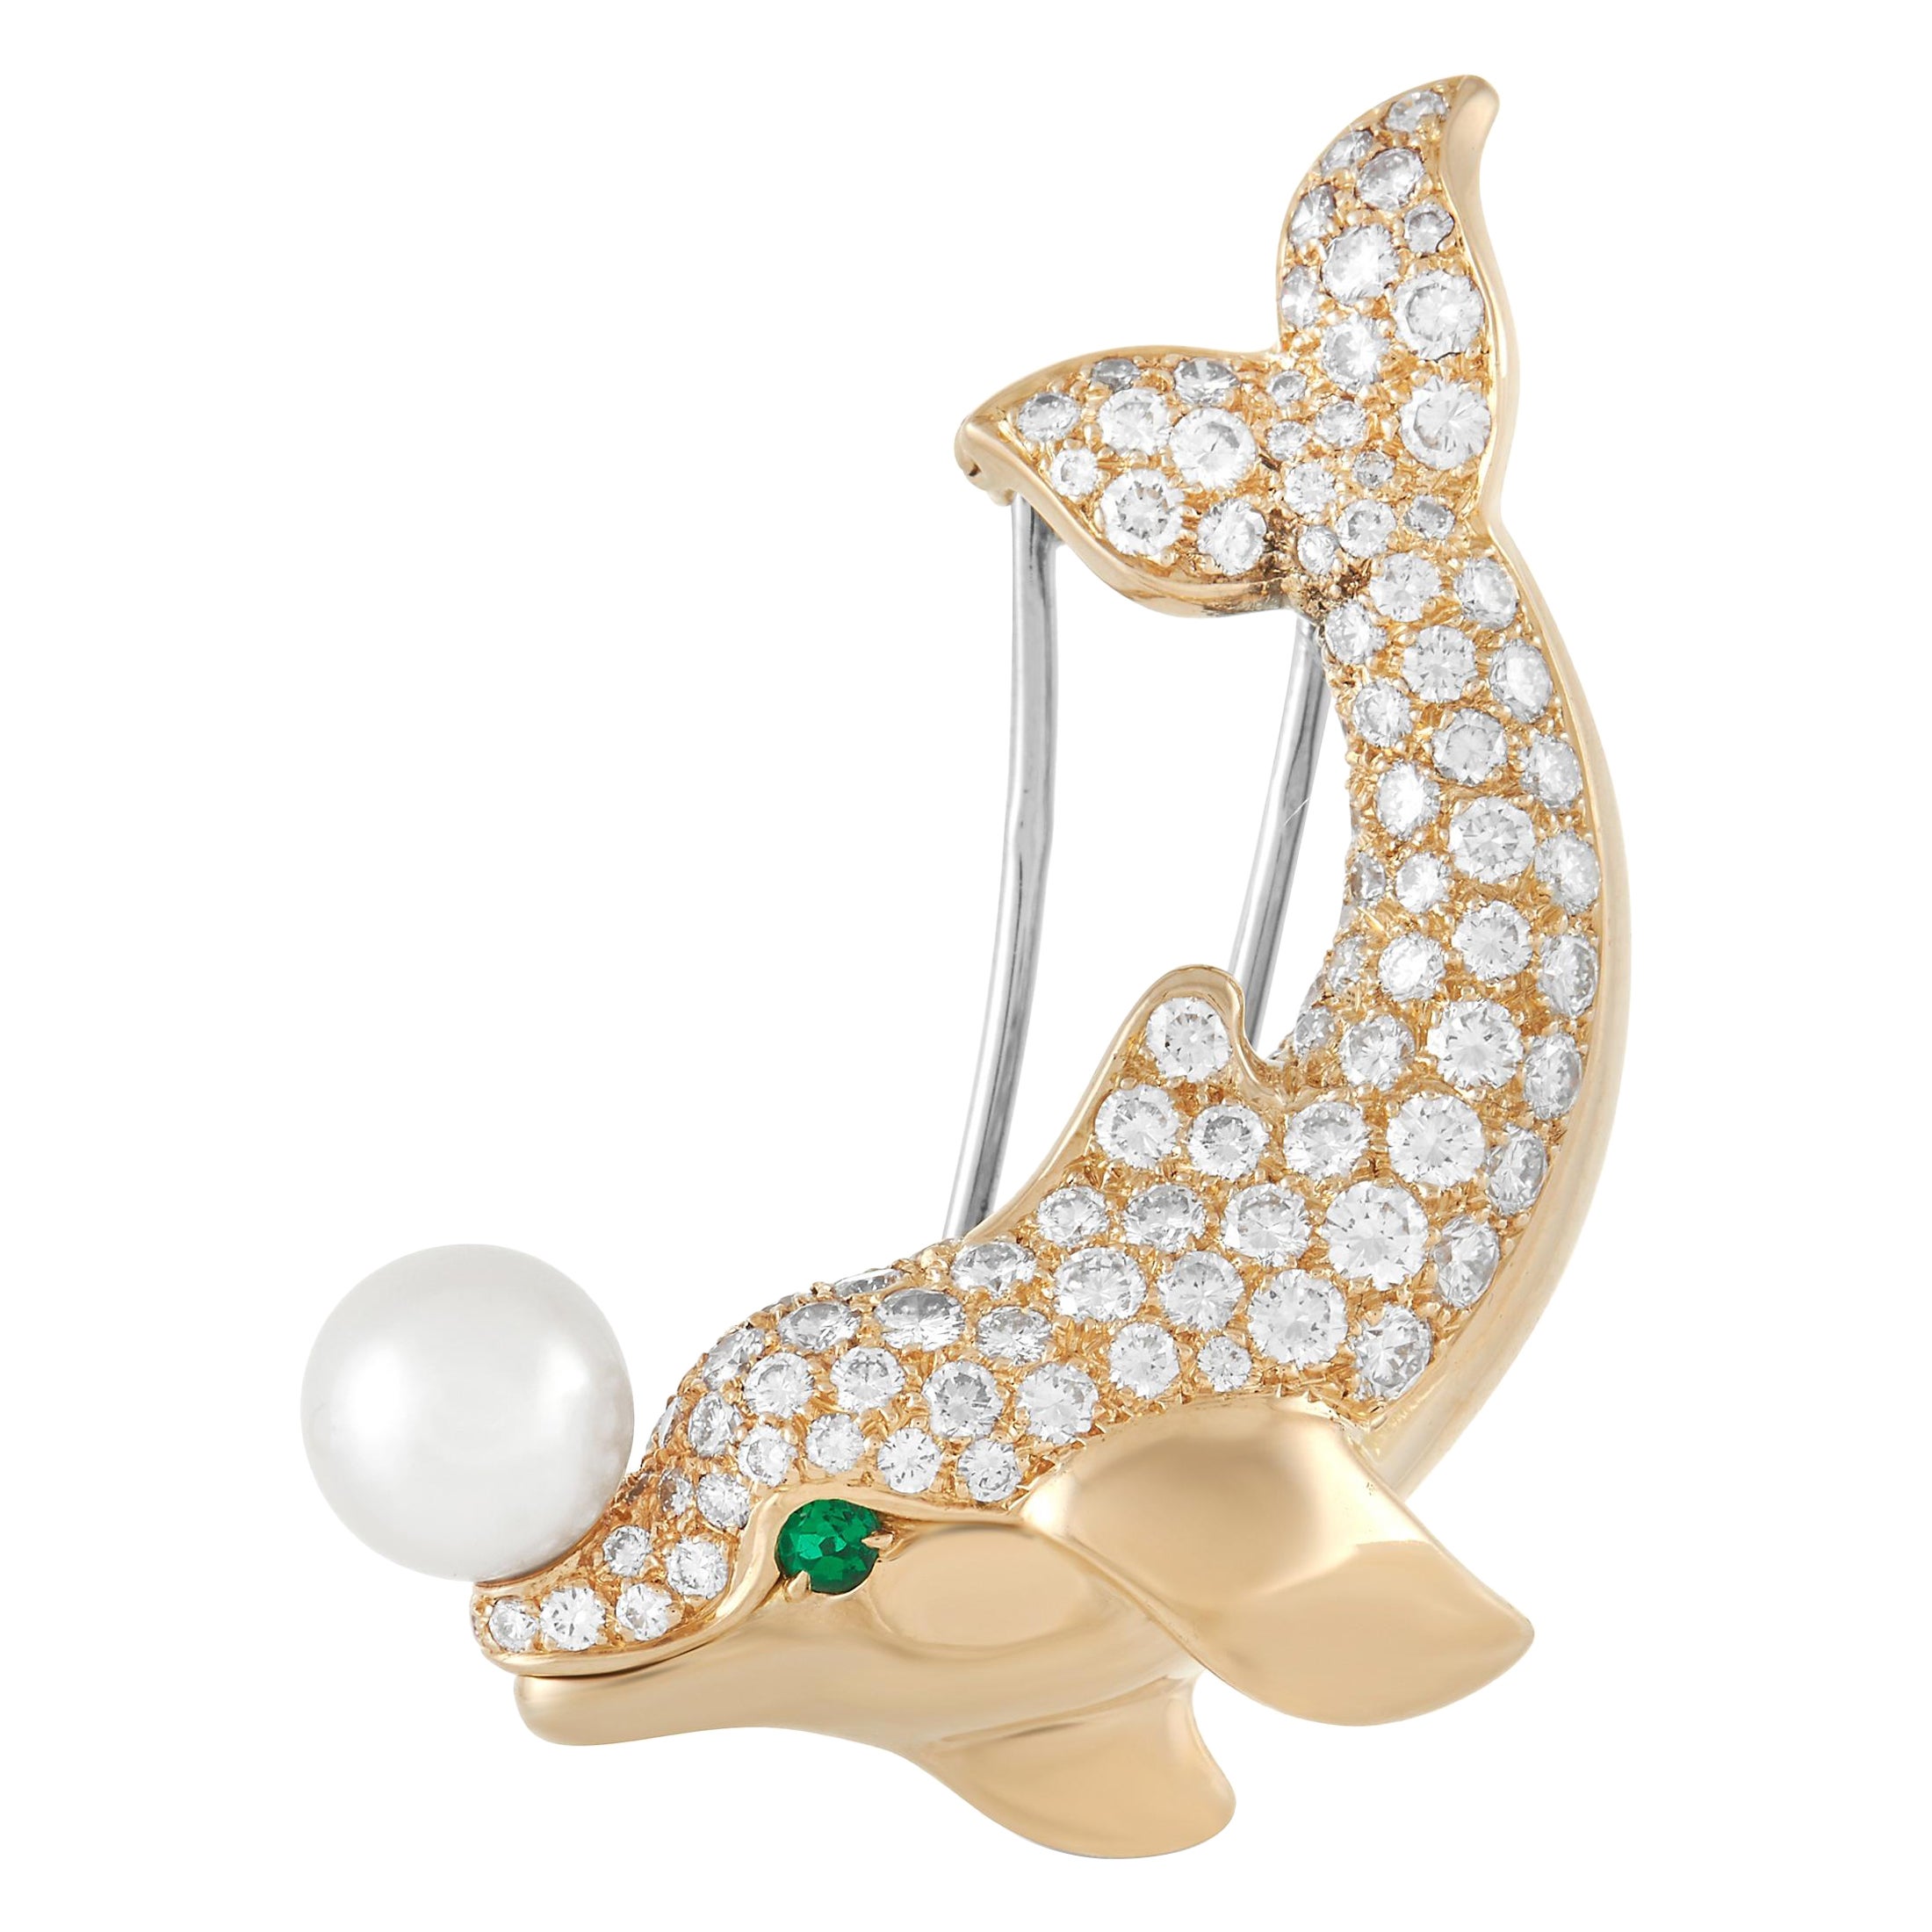 Cartier 18K Yellow Gold 2.10 ct Diamond, Pearl, and Emerald Dolphin Brooch